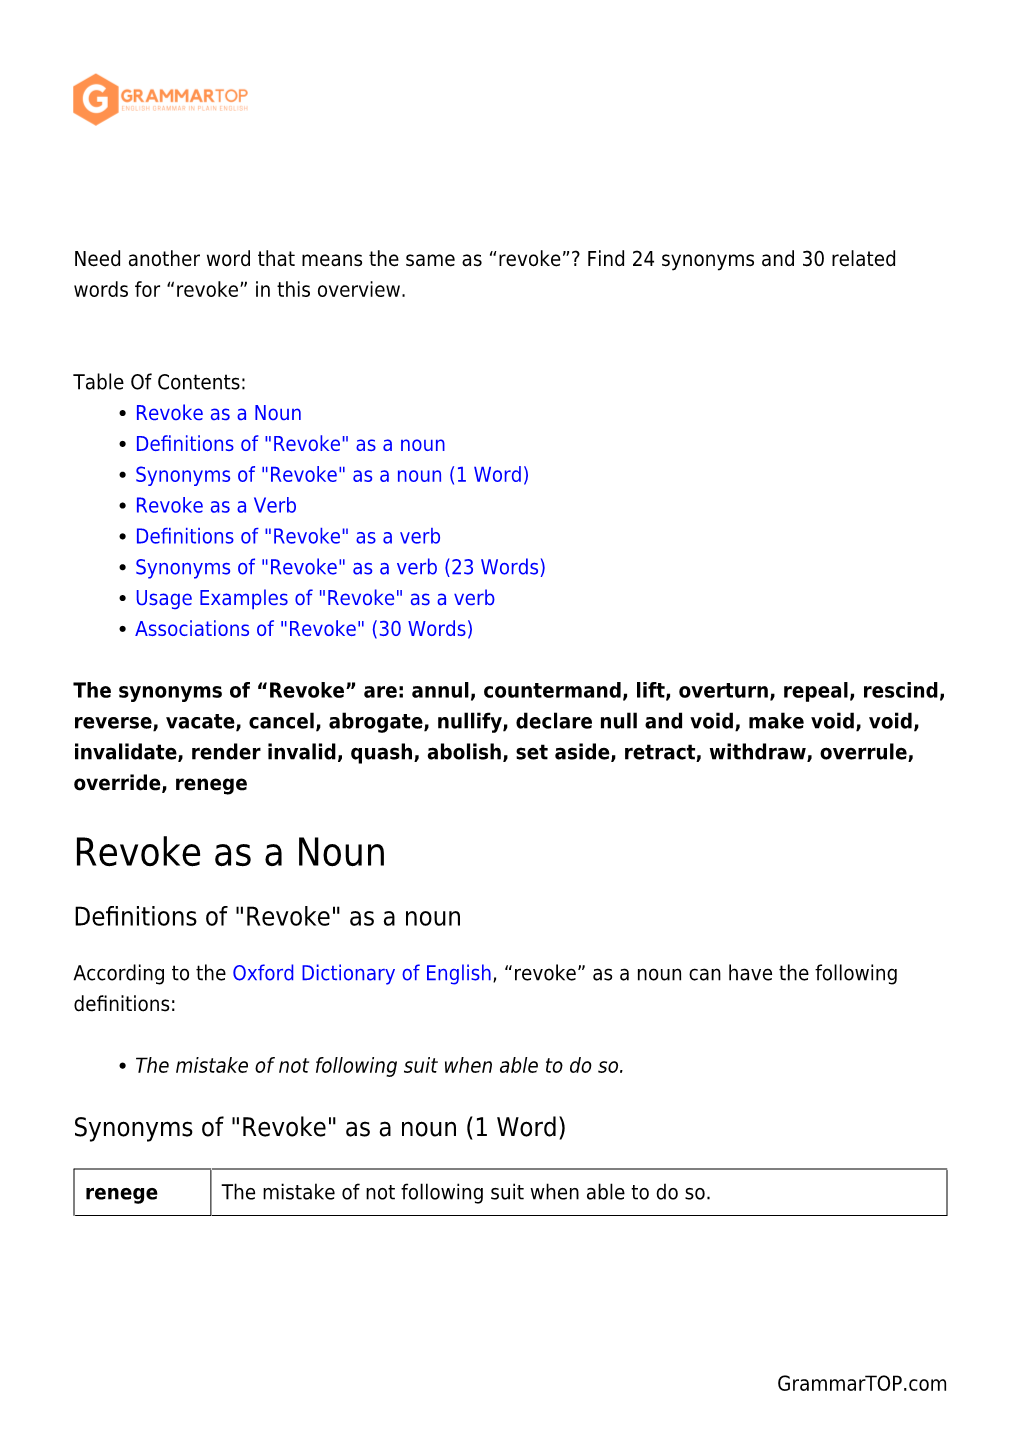 Revoke”? Find 24 Synonyms and 30 Related Words for “Revoke” in This Overview